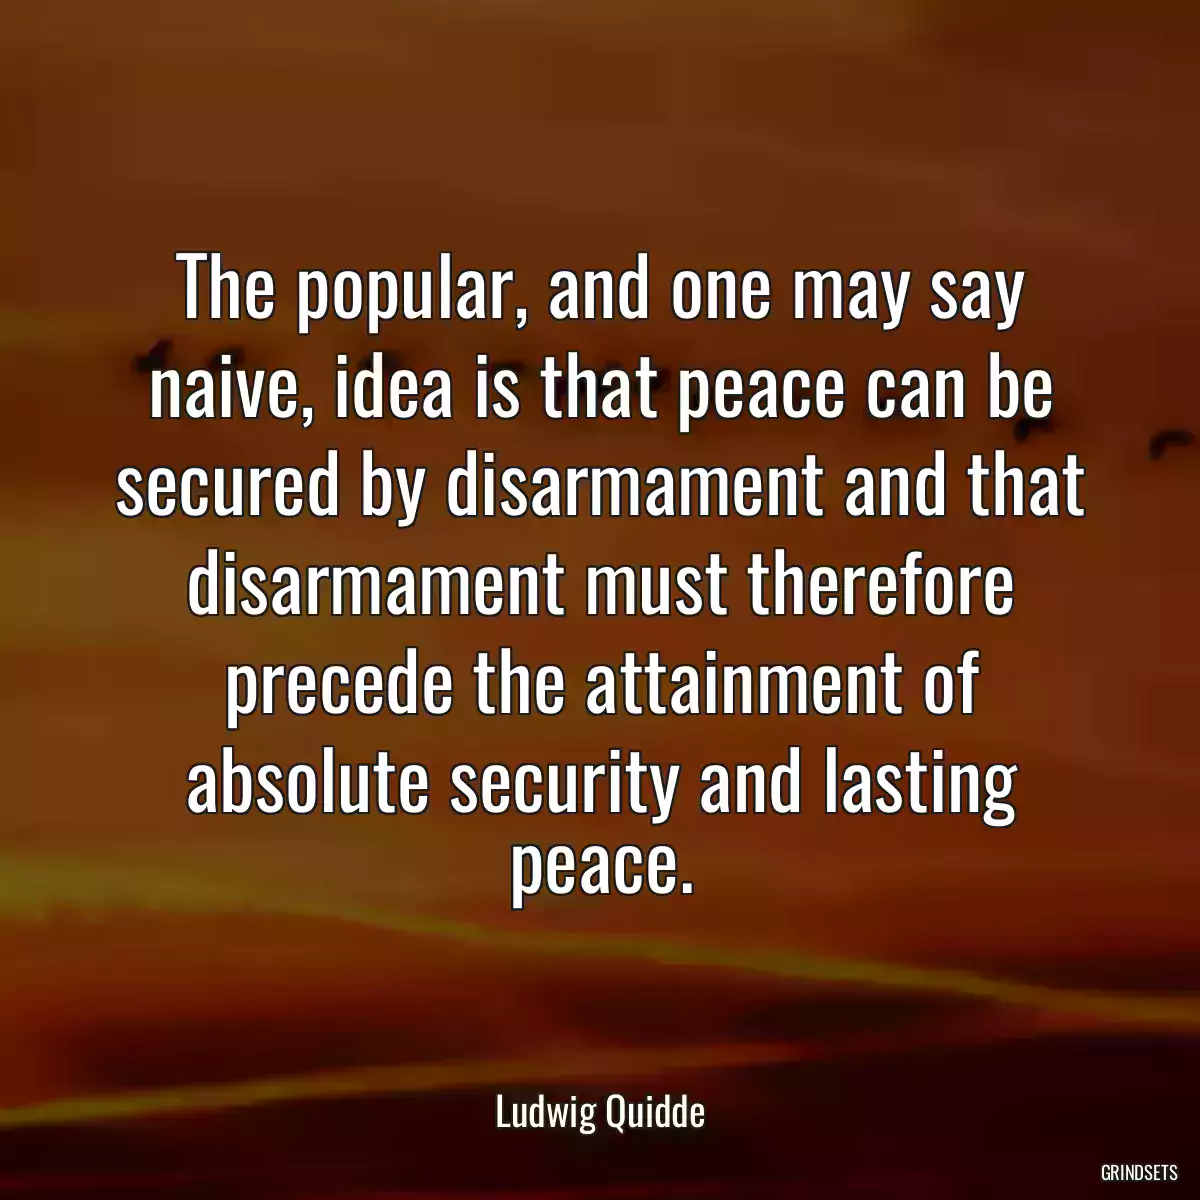 The popular, and one may say naive, idea is that peace can be secured by disarmament and that disarmament must therefore precede the attainment of absolute security and lasting peace.